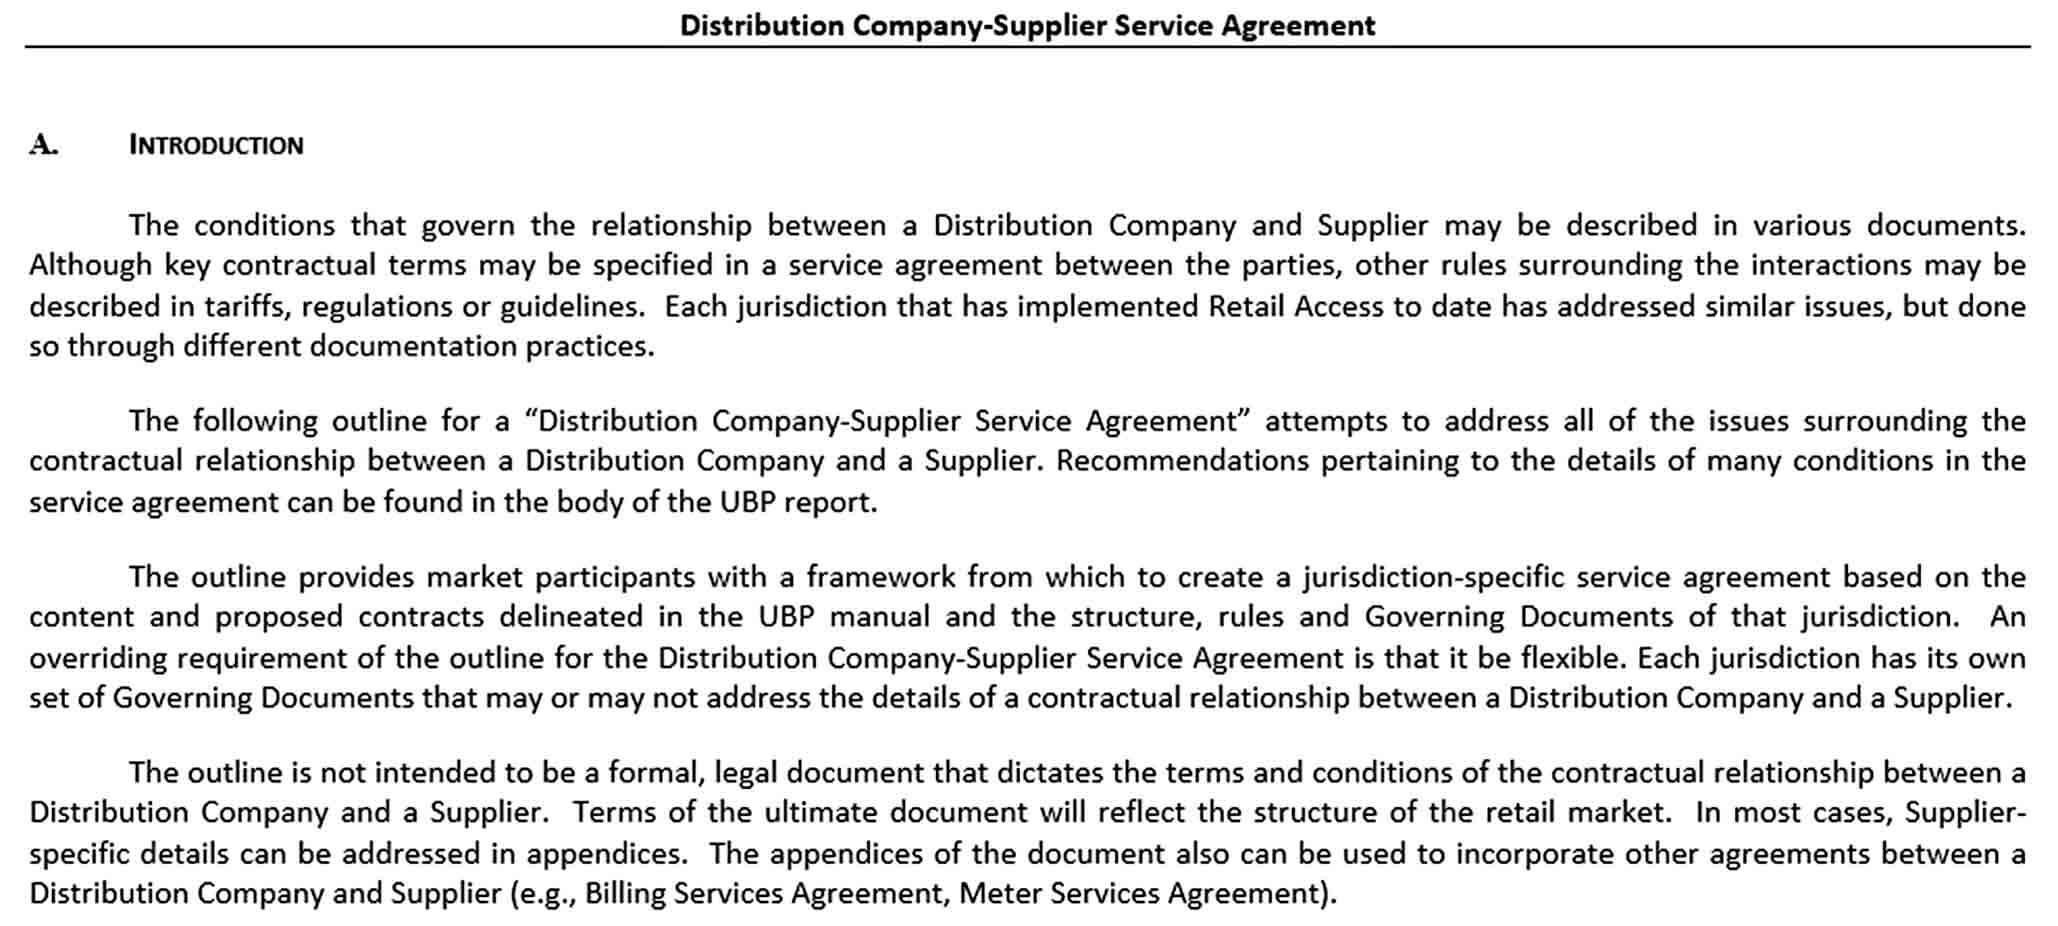 Sample Distribution Company Supplier Service Agreement